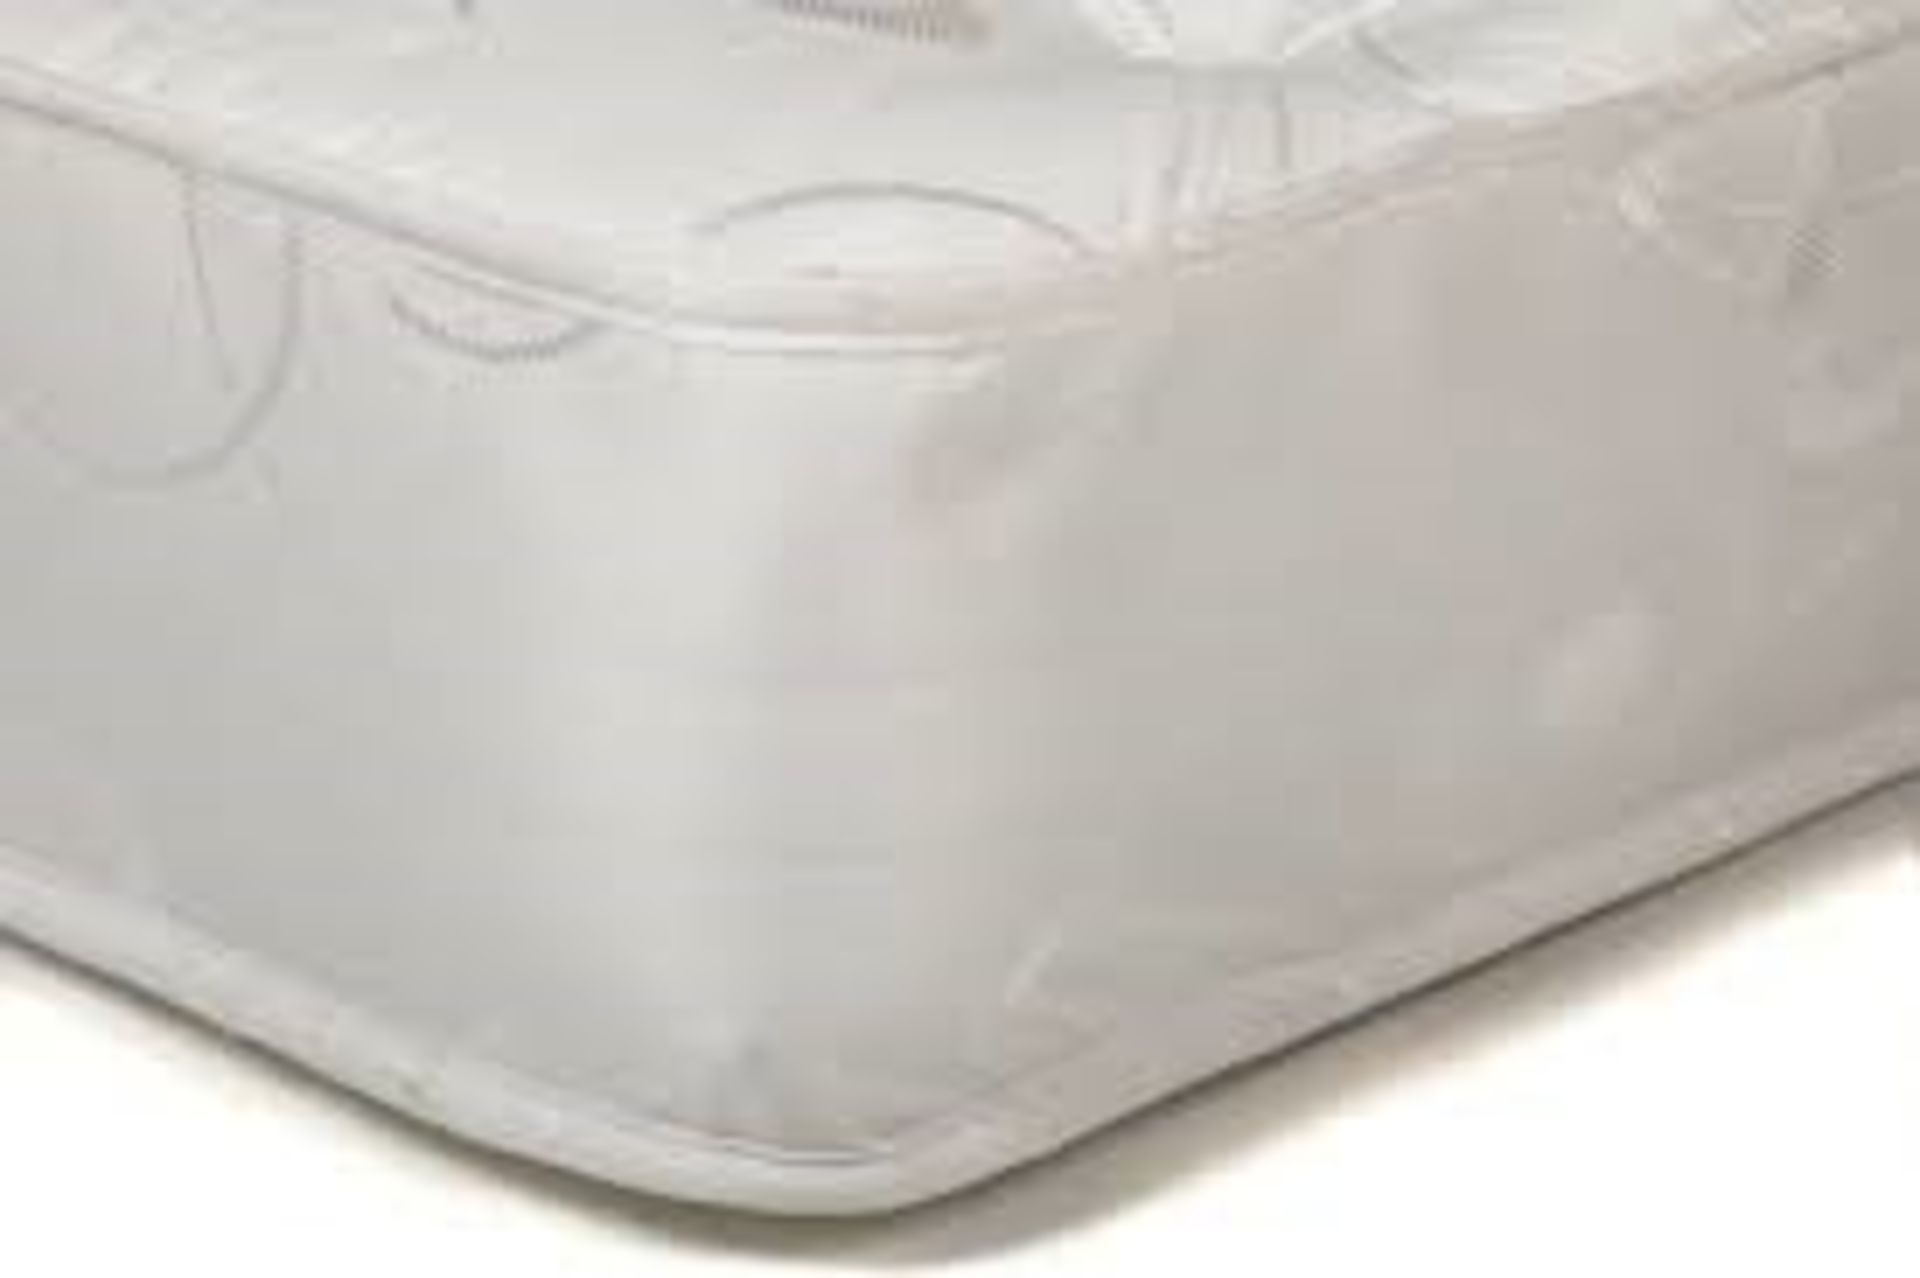 1 BRAND NEW AIRSPRUNG DOUBLE MATTRESS / SIZE 4FT 6" / RRP £169.99 - PICTURE FOR ILLUSTRATION